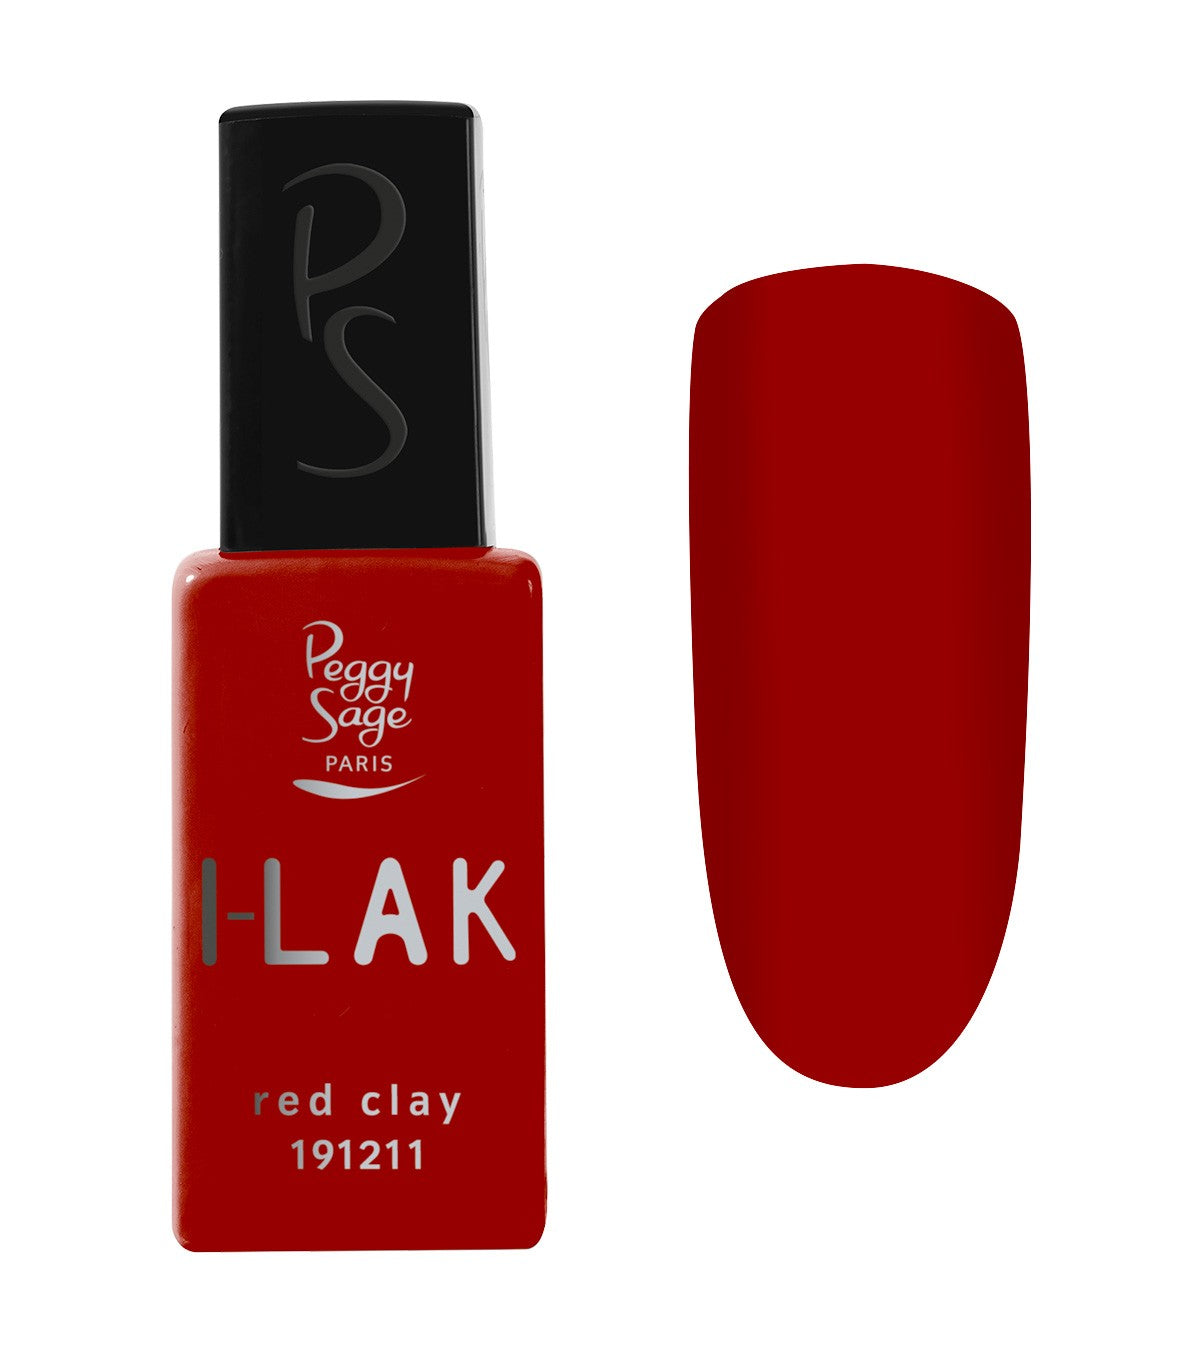 I-LAK Red Clay Ref 191211